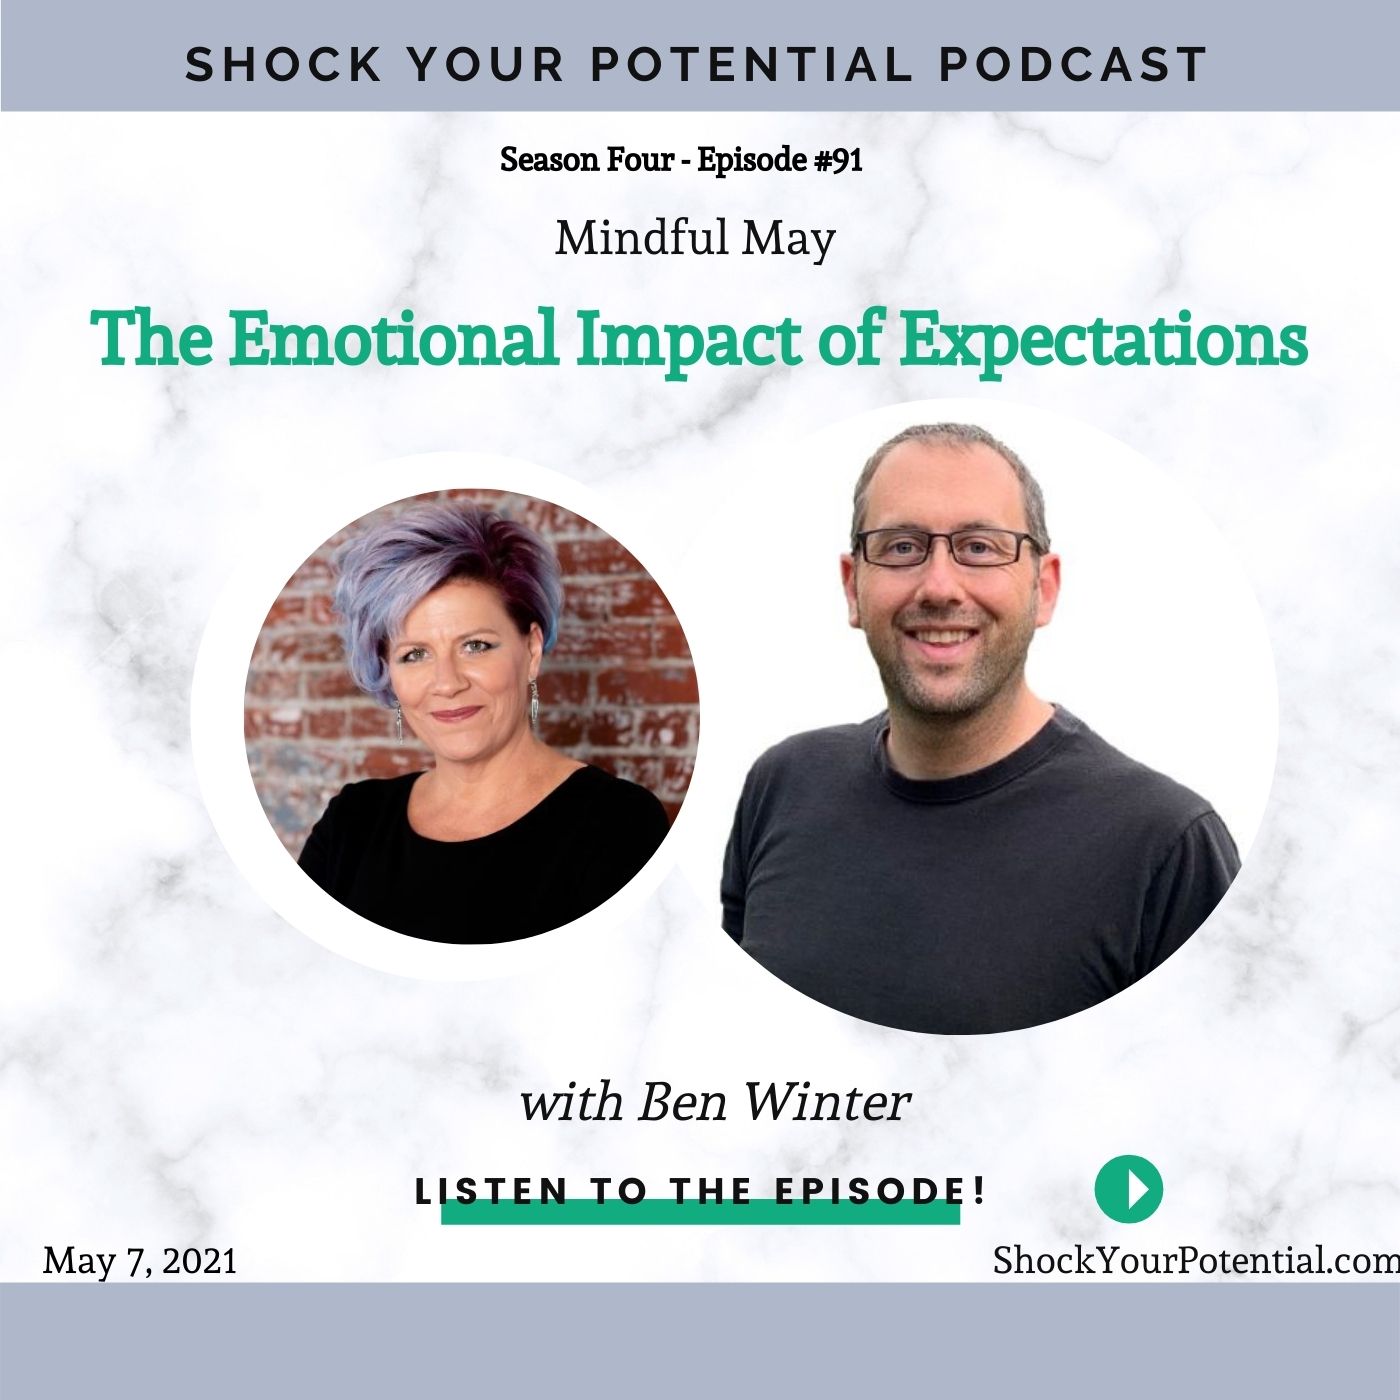 The Emotional Impact of Expectations – Ben Winter